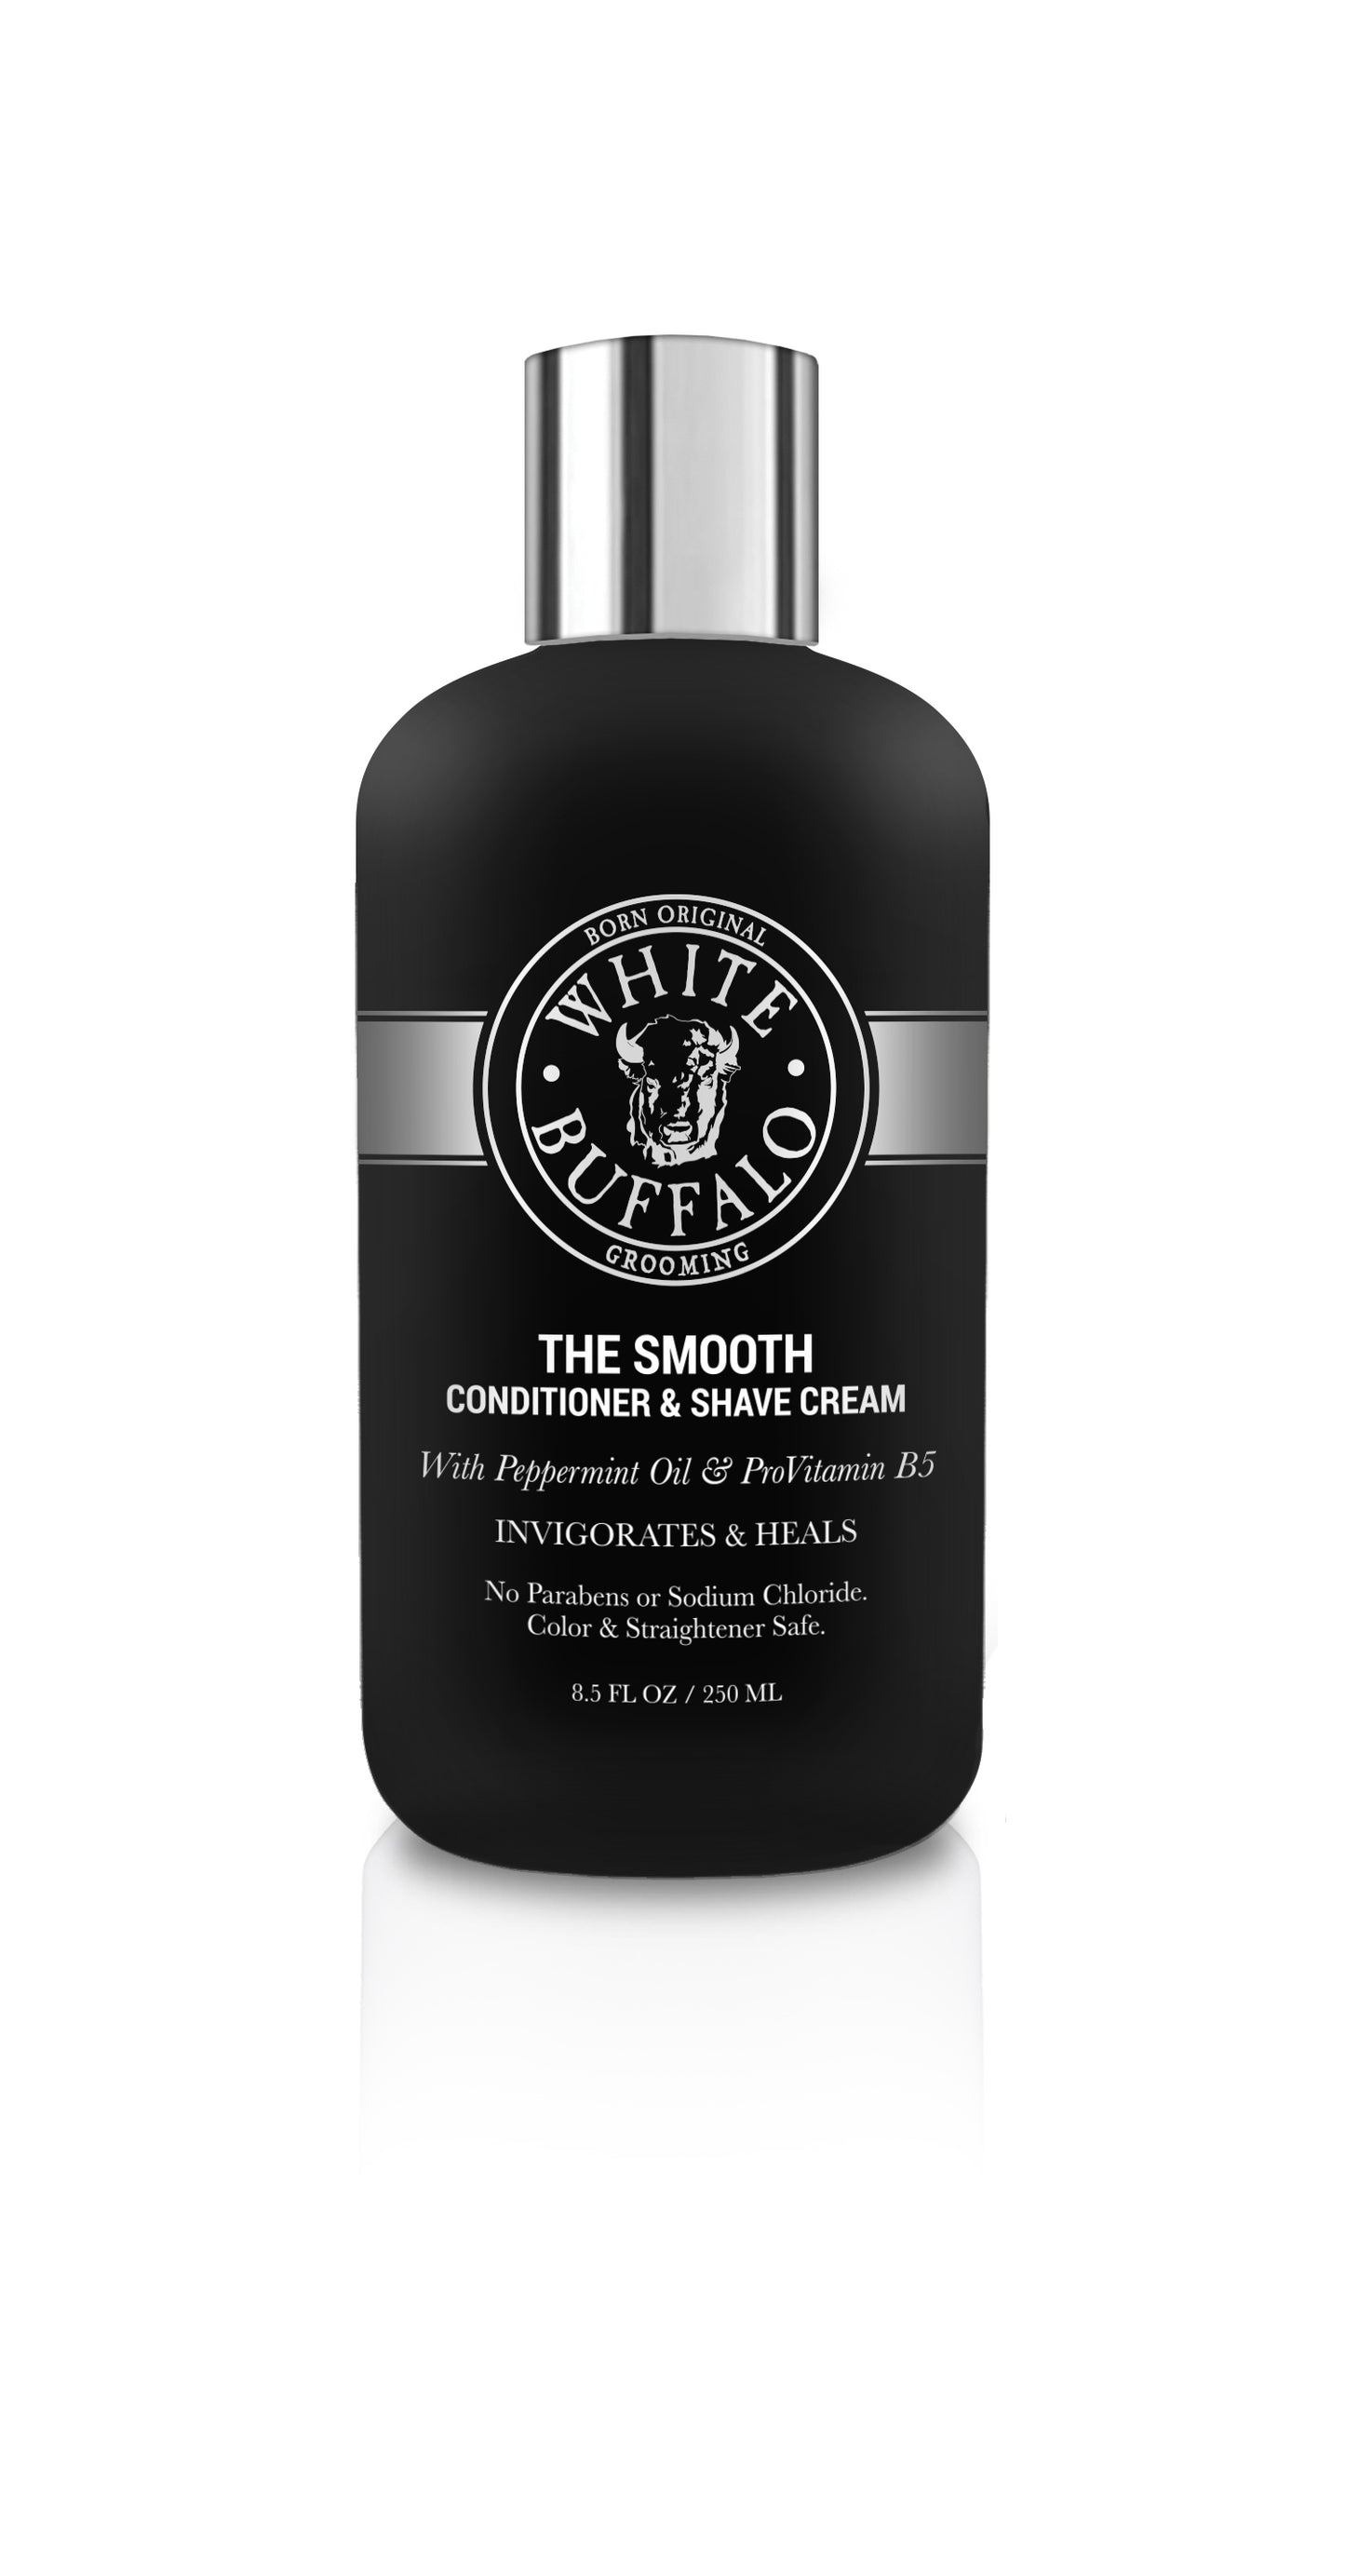 The Smooth Shave Cream and Conditioner